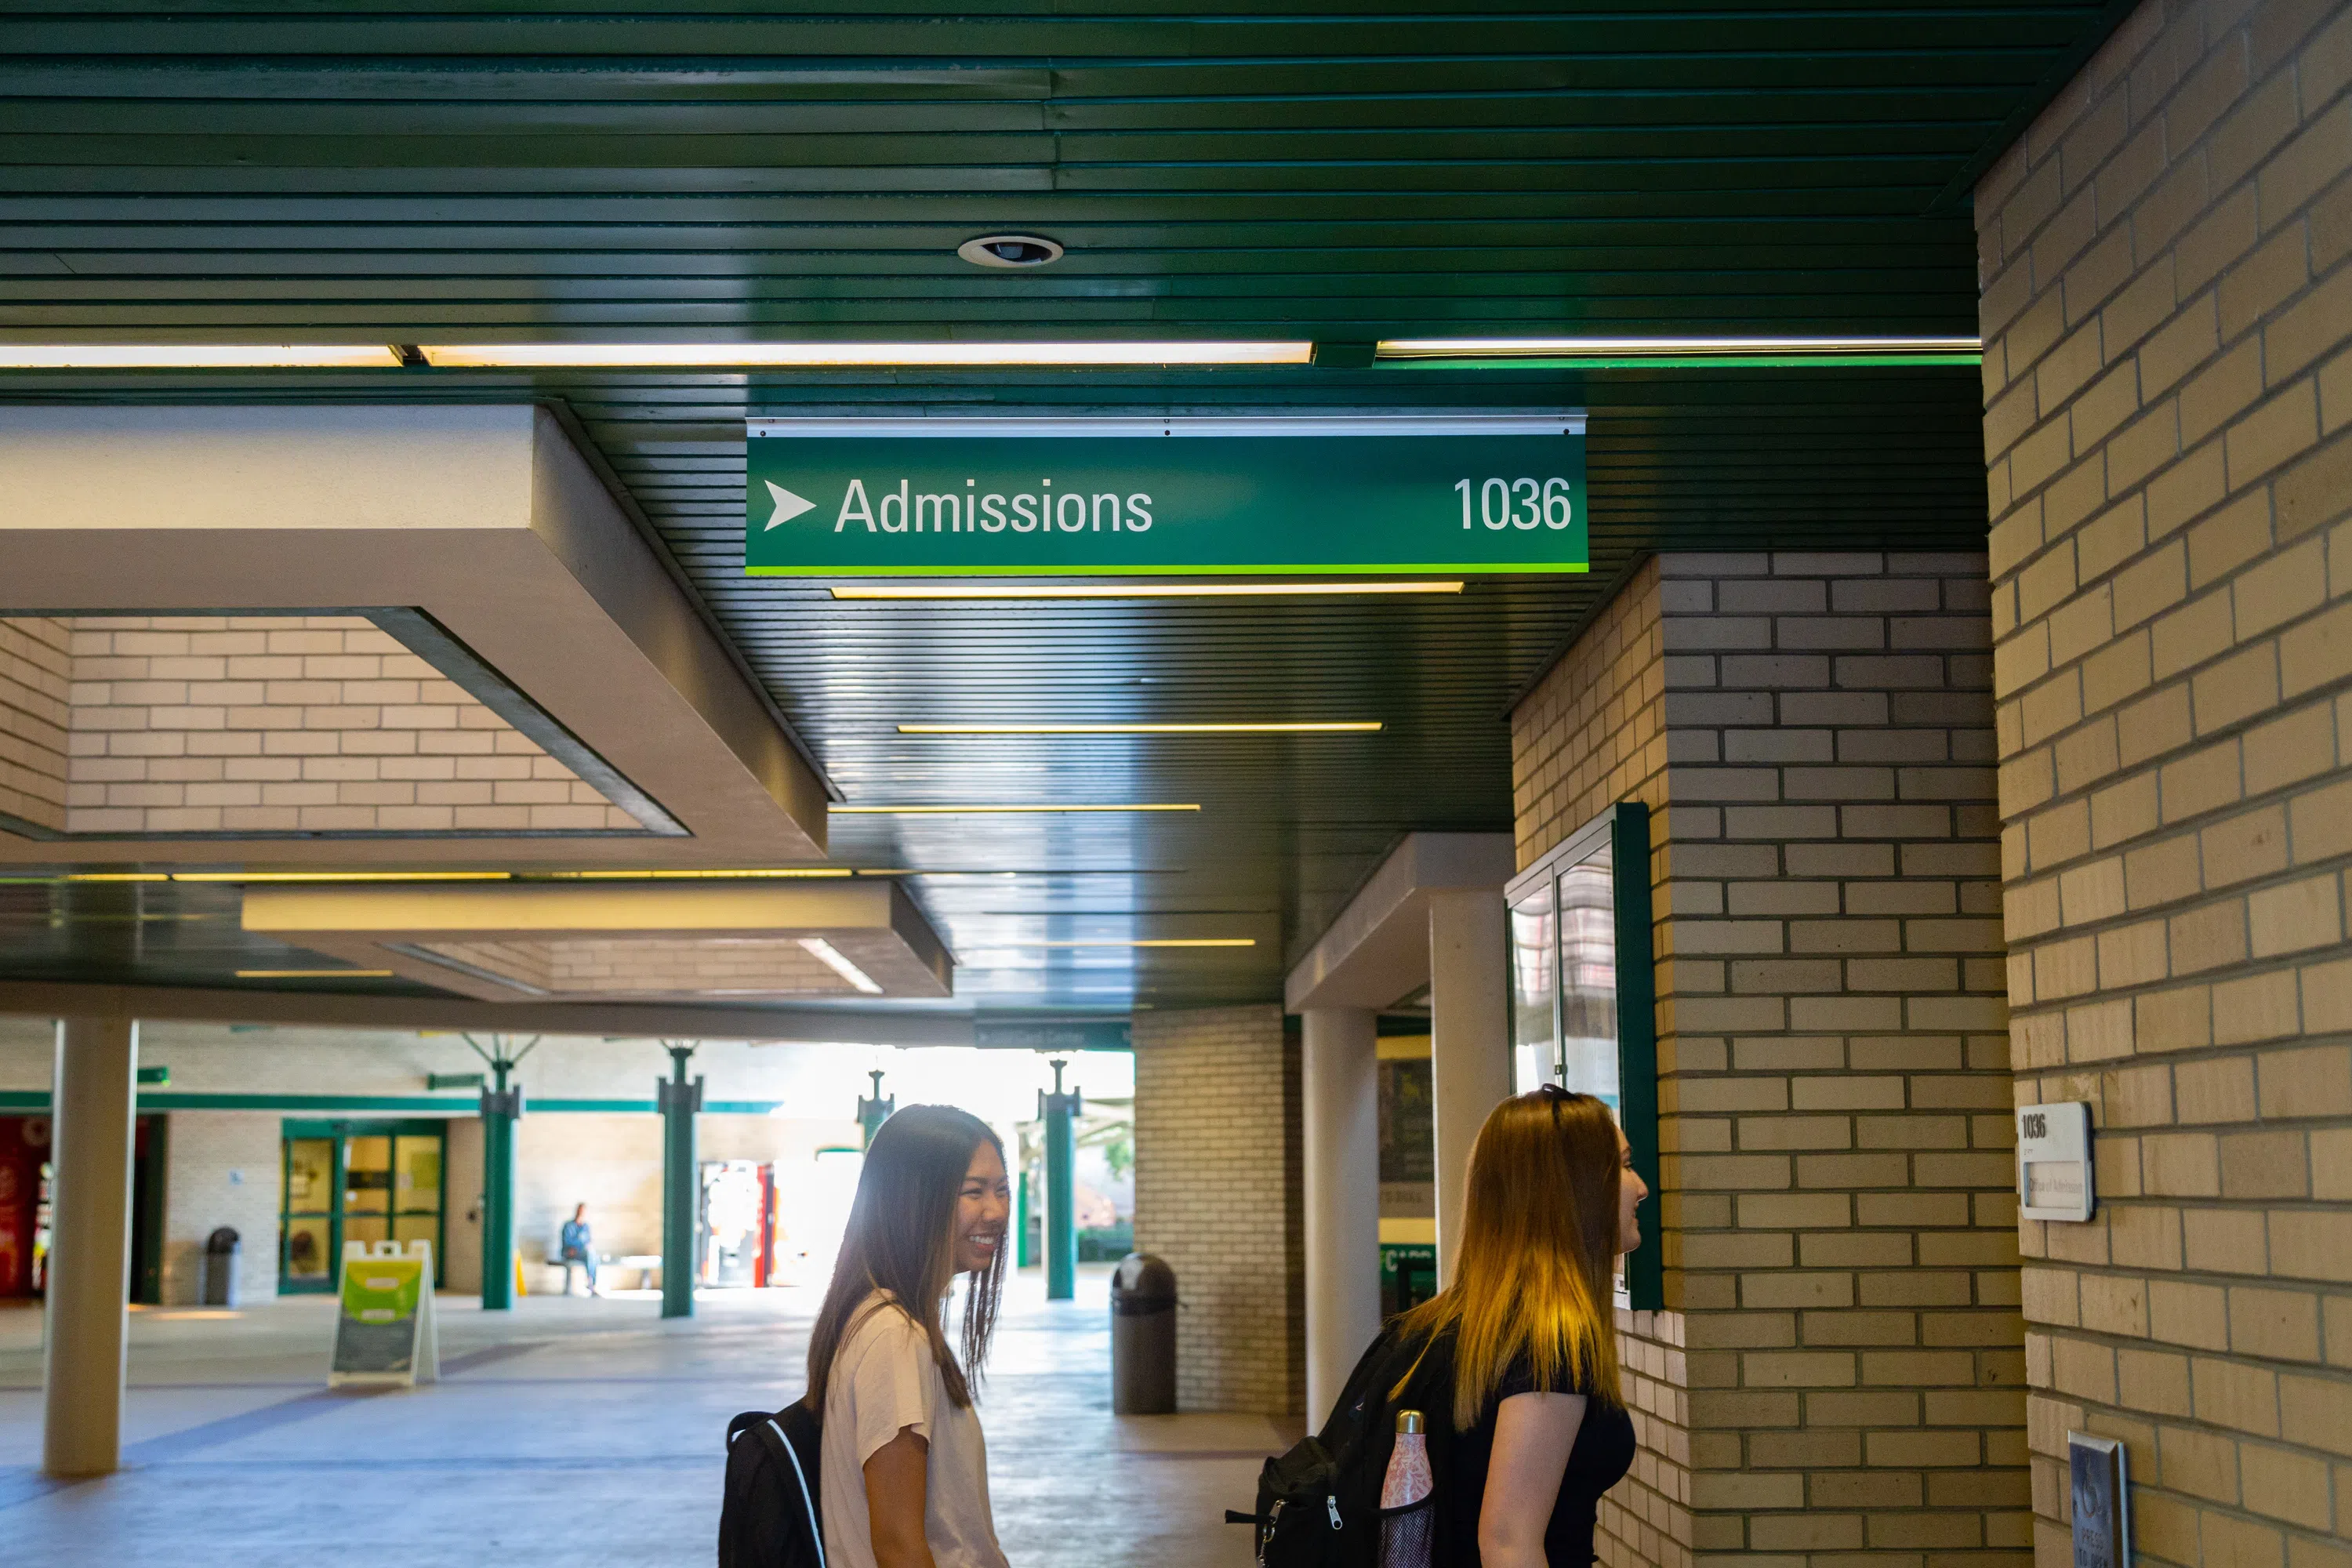 1st floor of SVC, Admissions entrance, Green Admissions sign: 1036